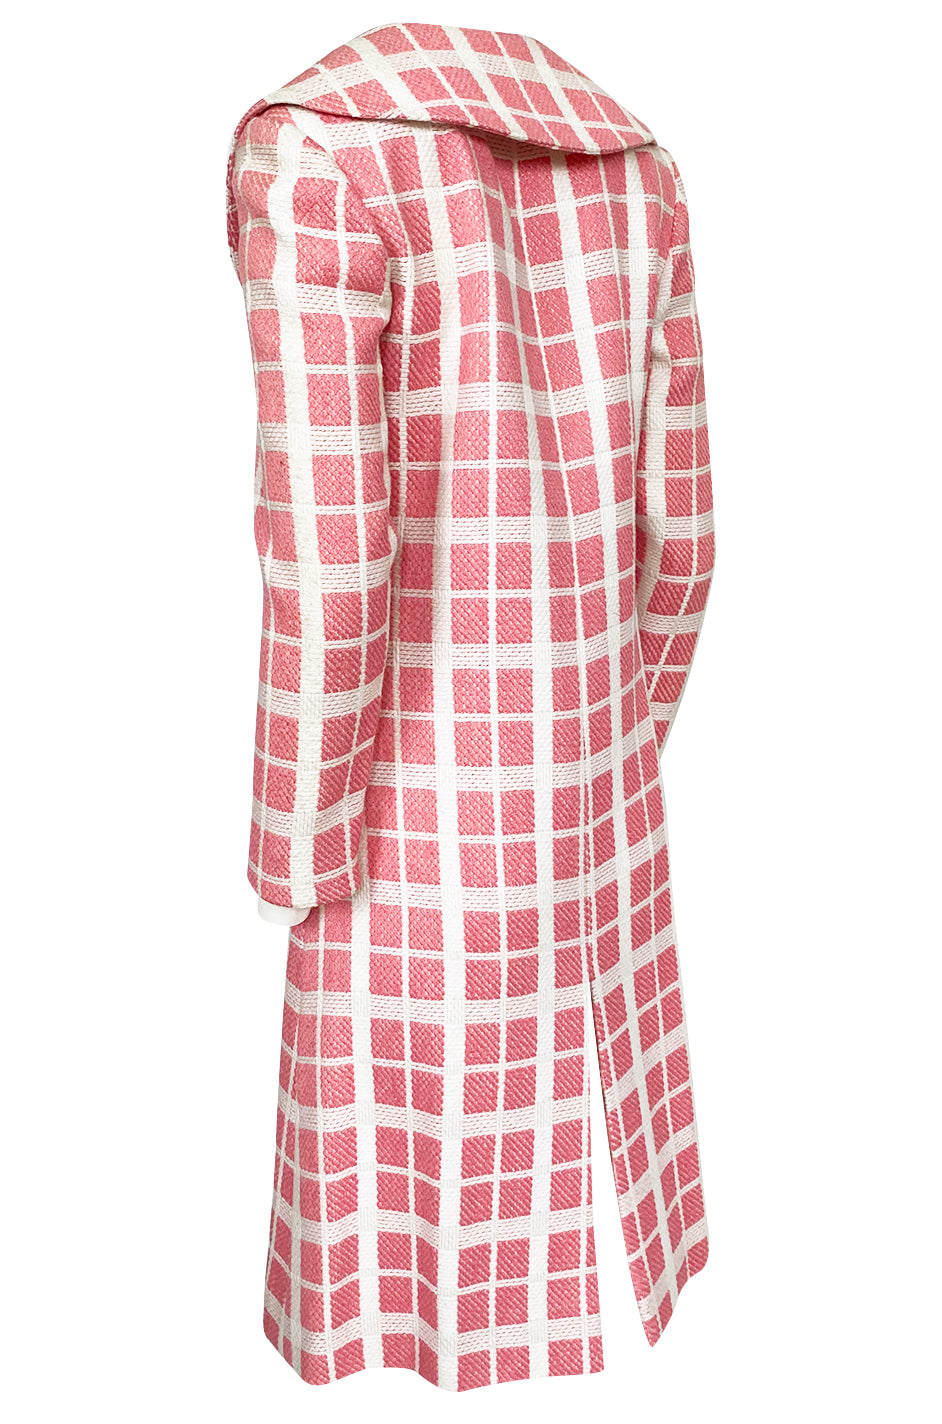 1960s Pierre Cardin Pink & White Check Woven Wool Fabric Spring Coat ...